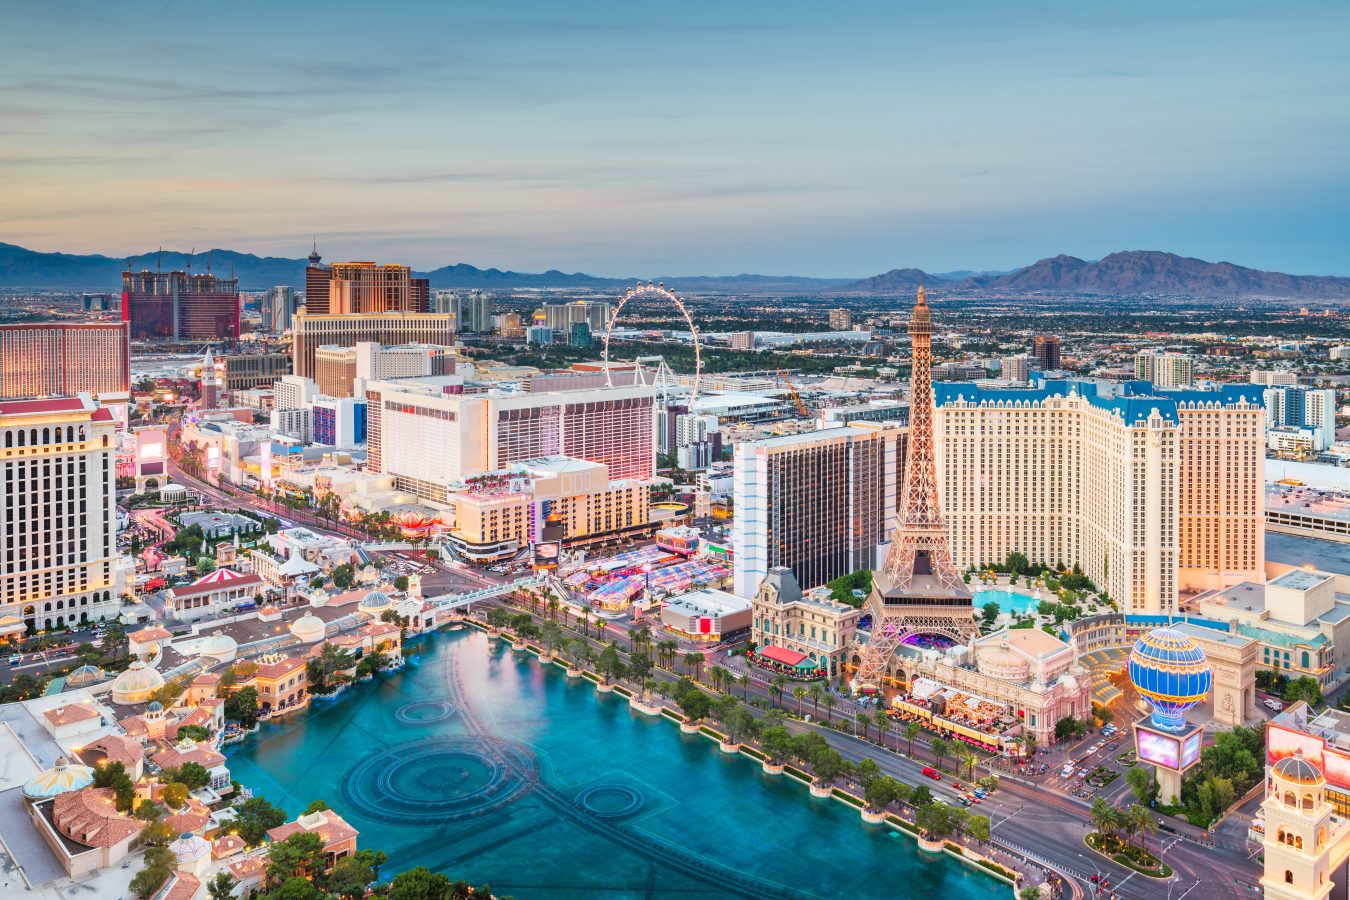 Aerial view of the Las Vegas strip in Nevada - one of the best spring break destinations for 2023.